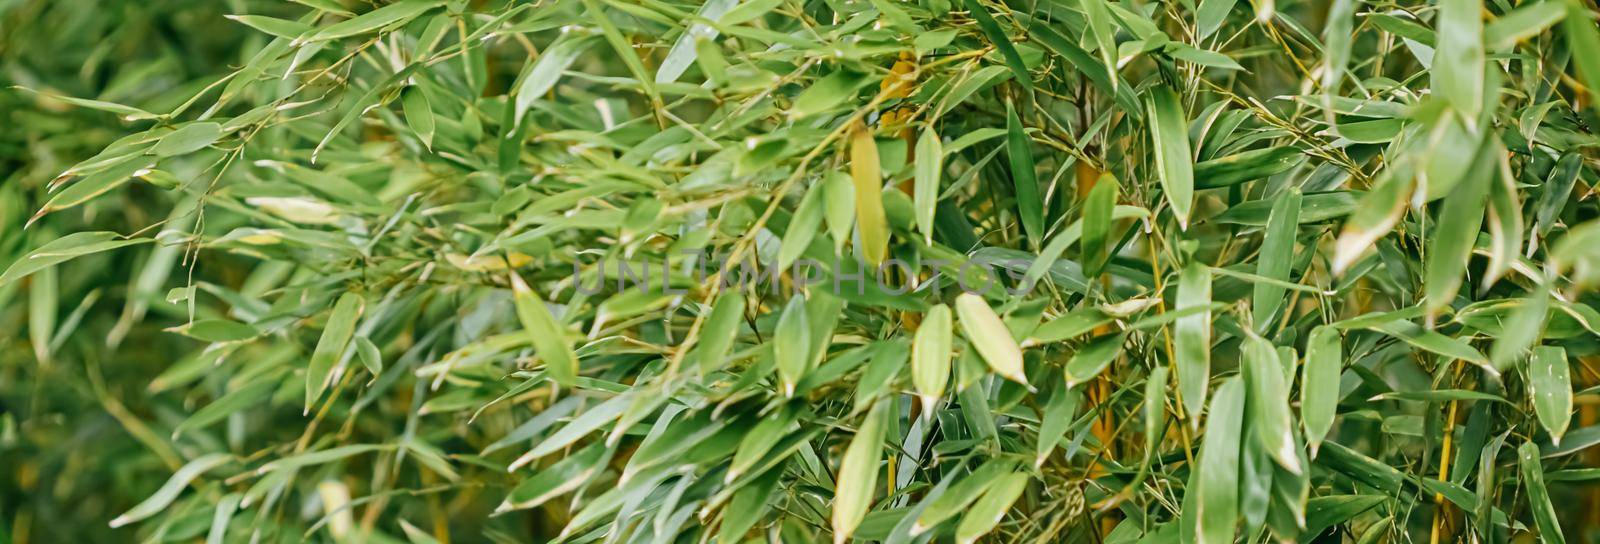 Bamboo background, fresh leaves on tree as nature, ecology and environment concept.